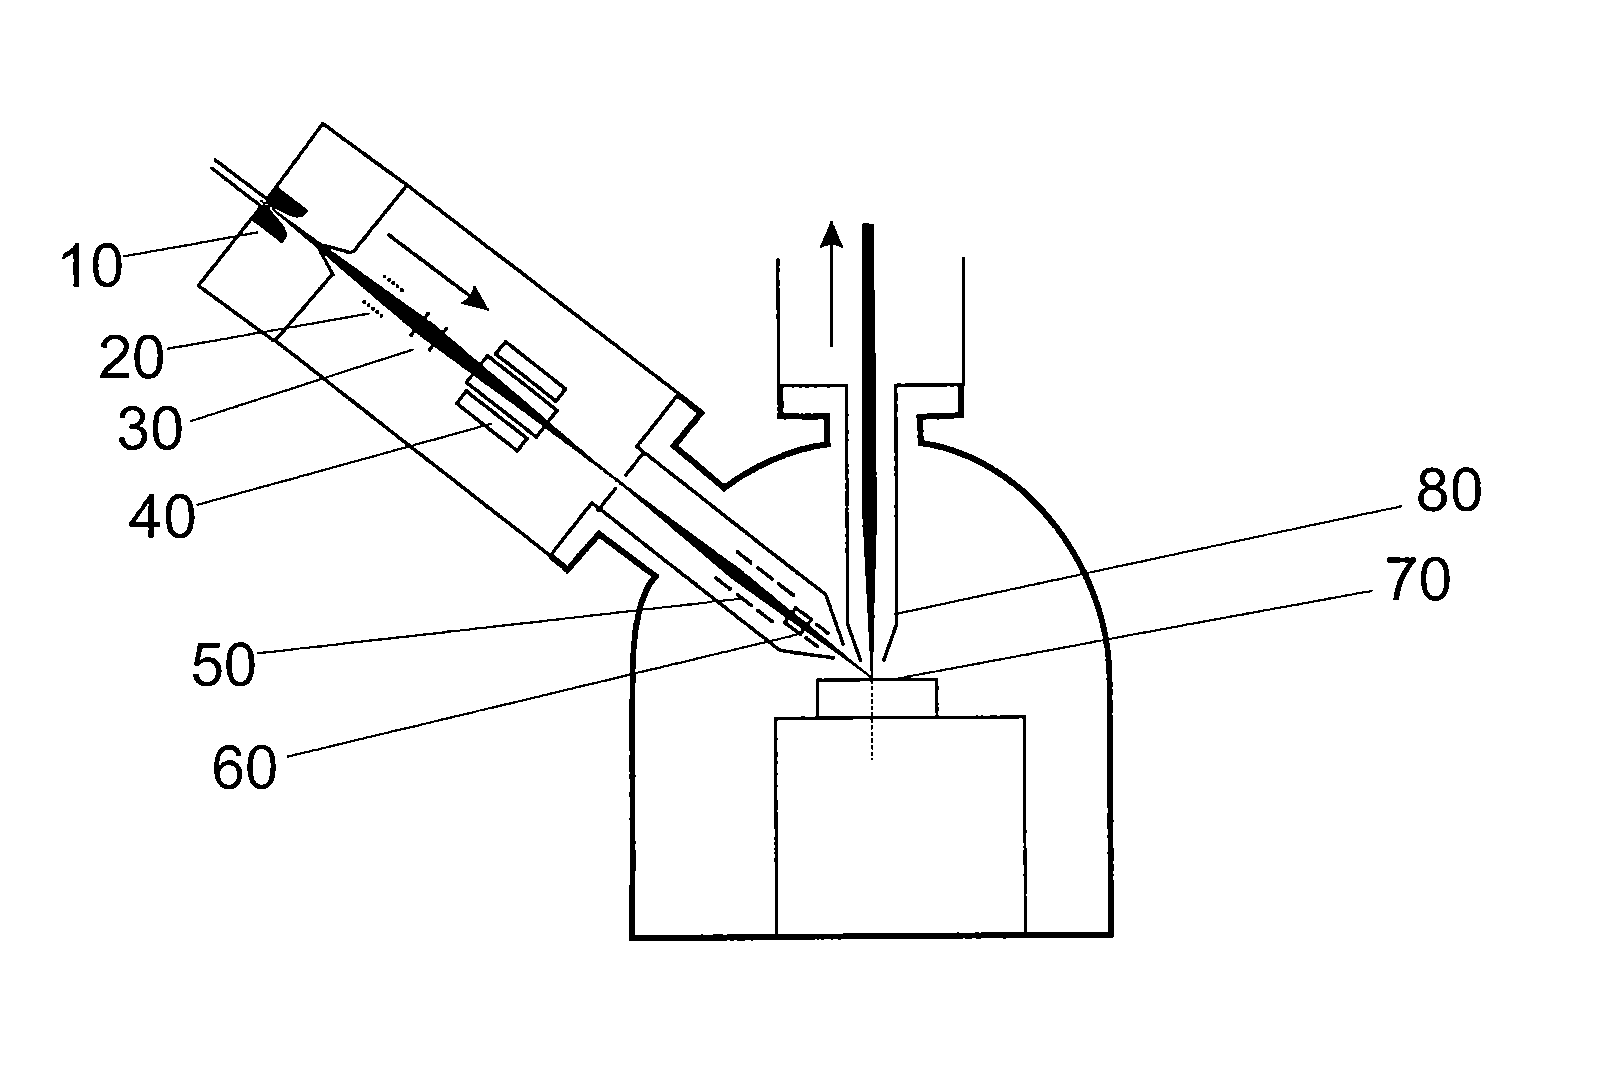 Apparatus and method relating to an improved mass spectrometer